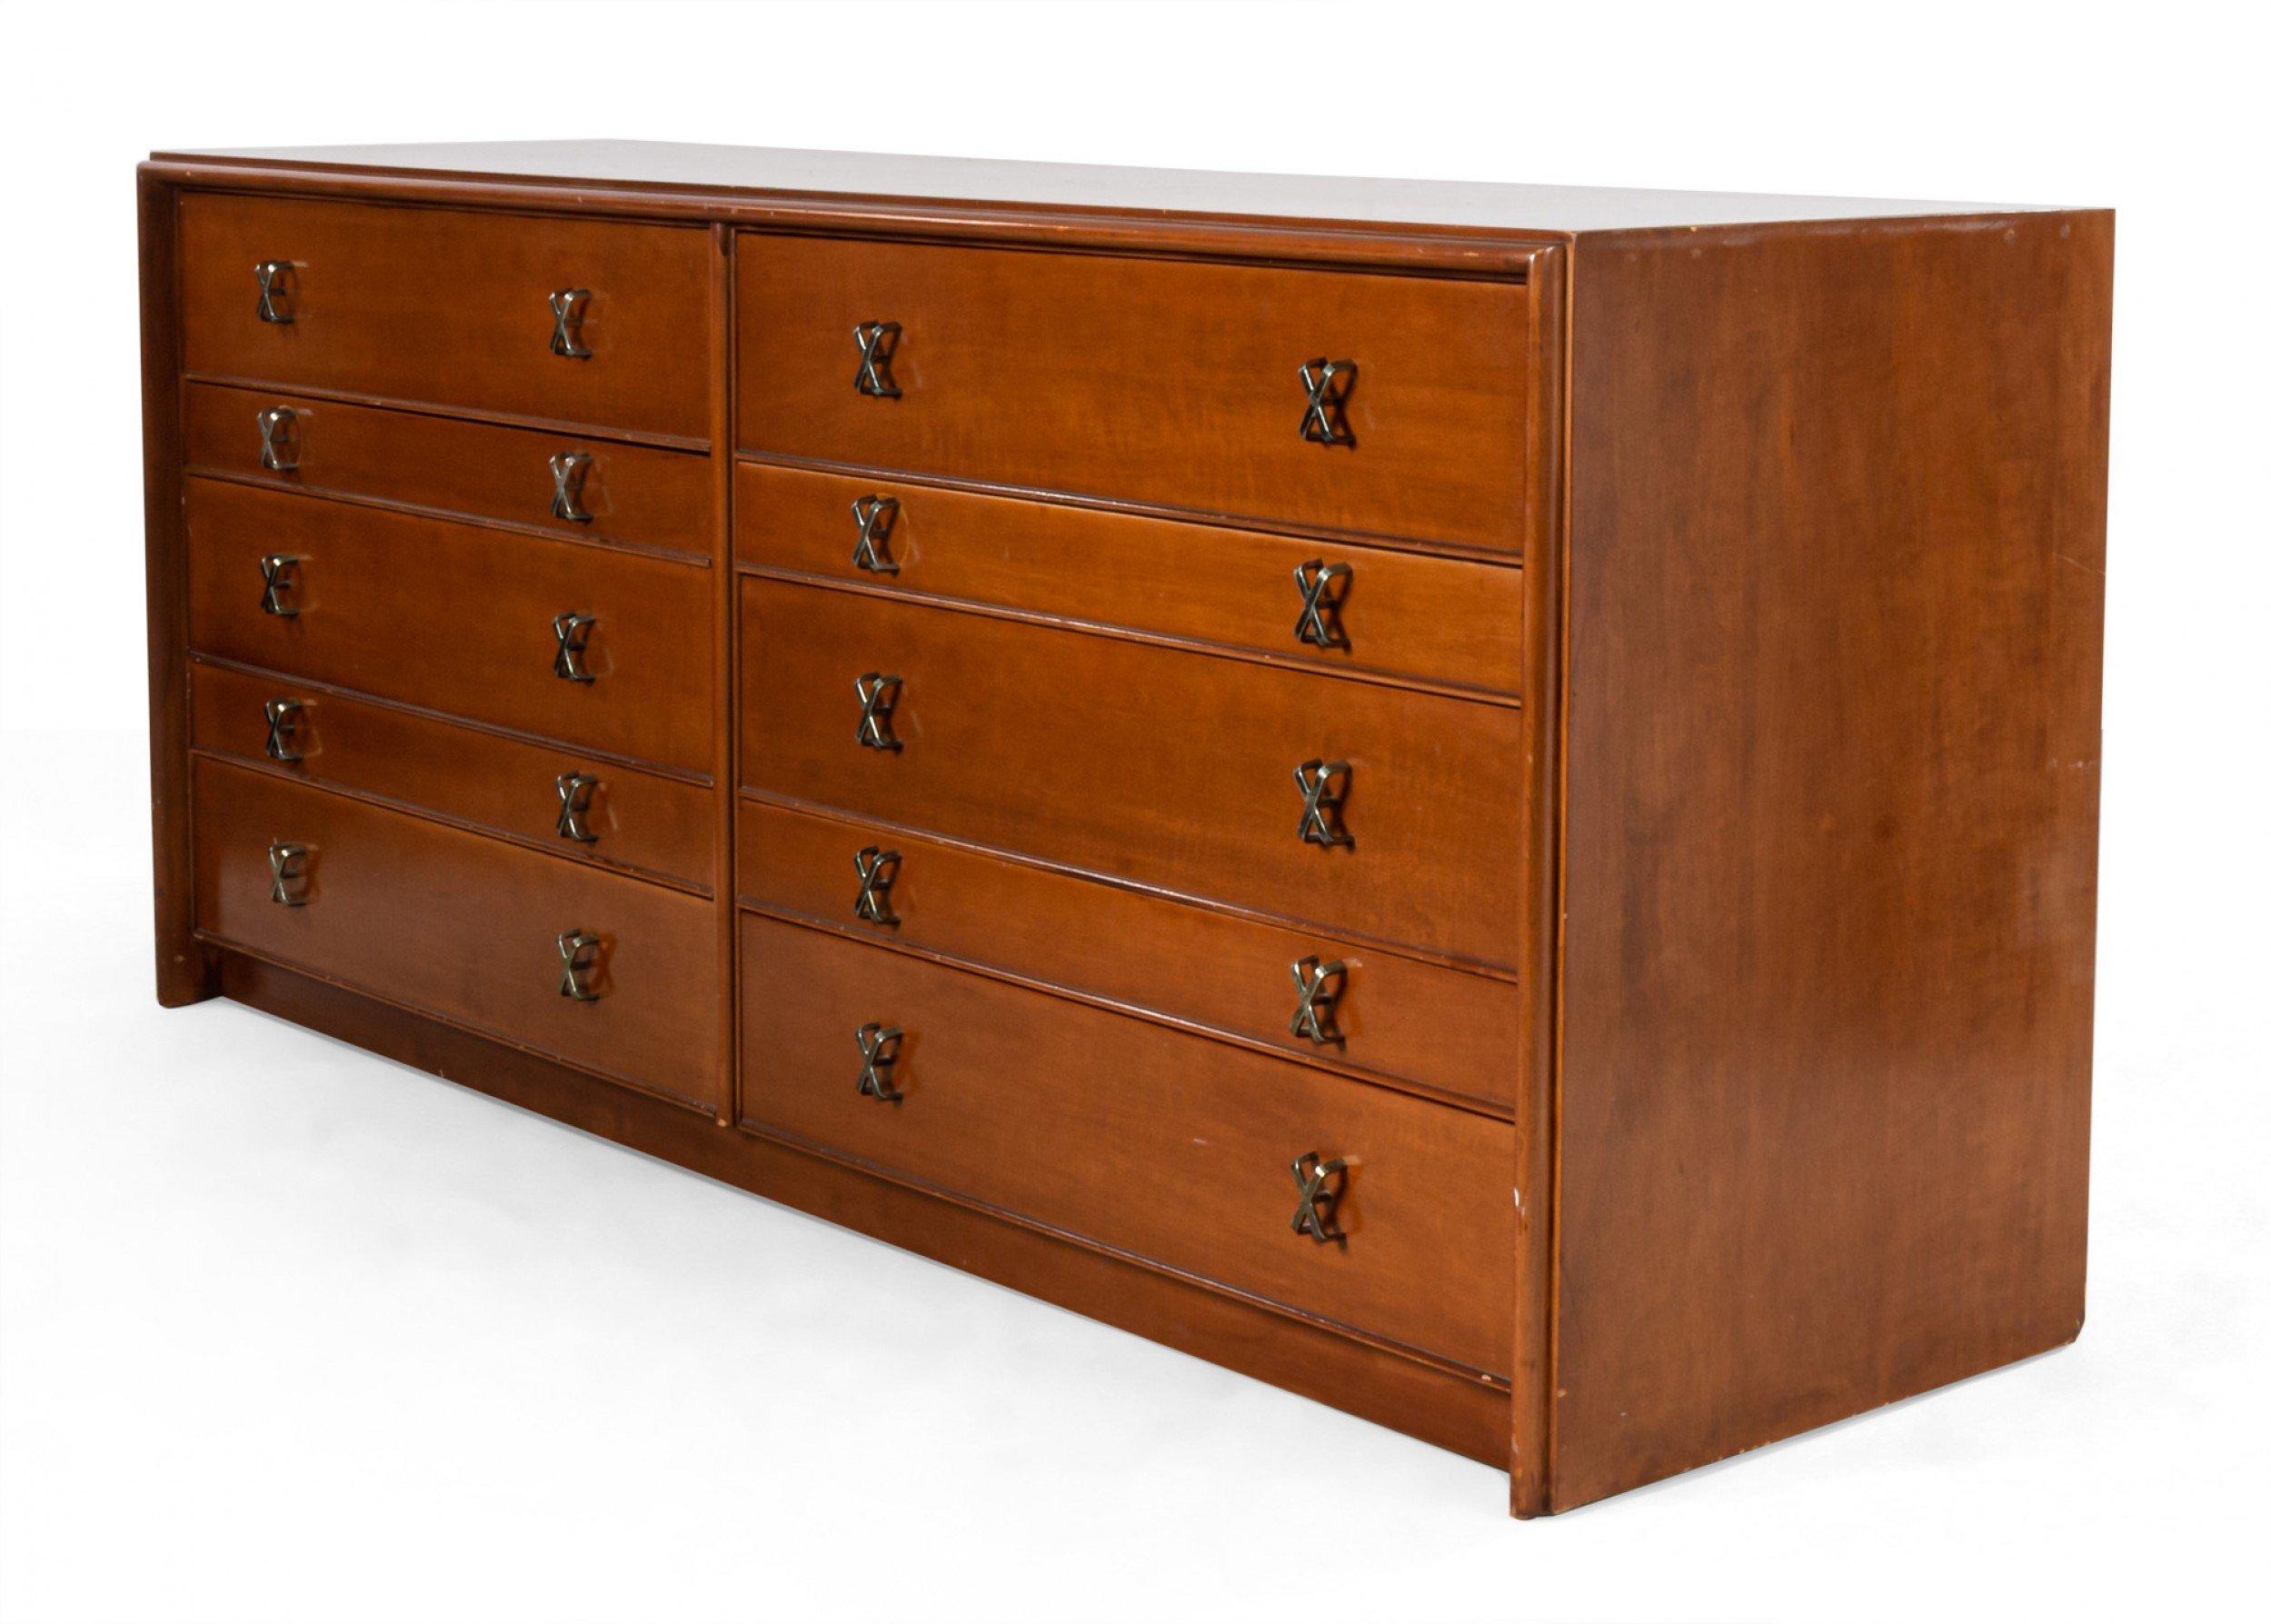 Paul Frankl midcentury double dresser with ten drawers with X-shaped metal drawer pulls.